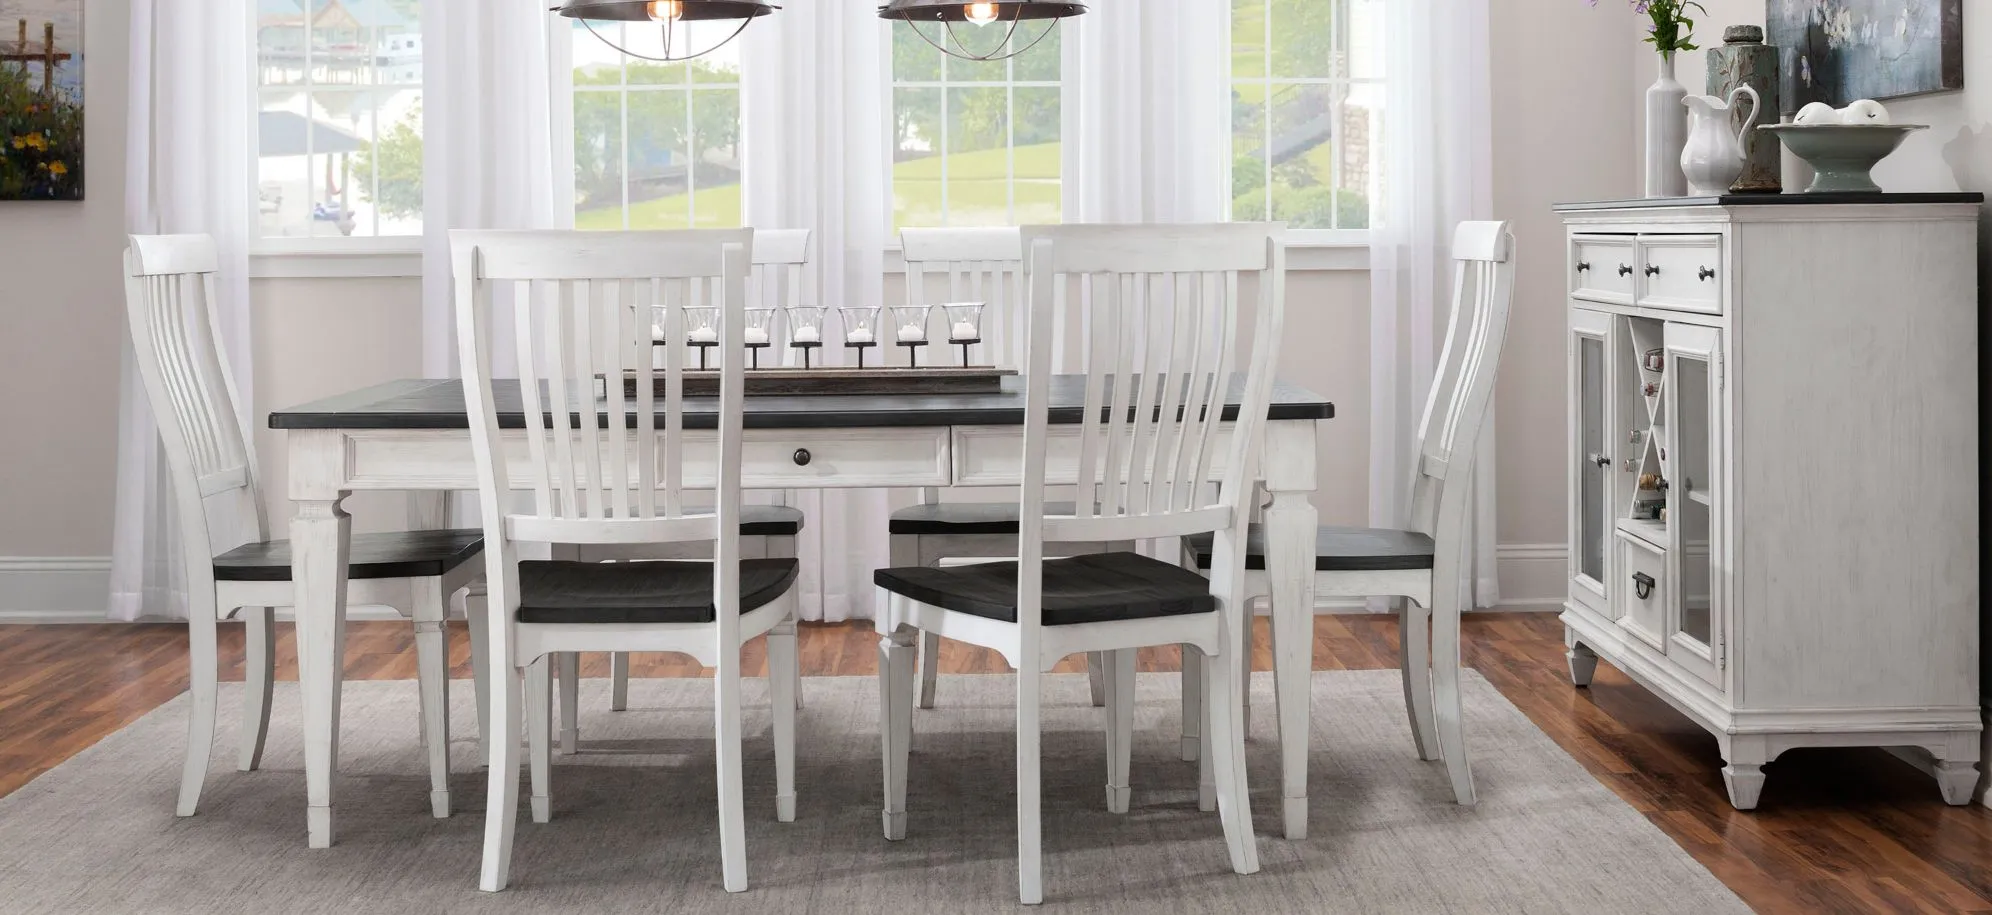 Shelby 7-pc. Dining Set in White / Gray by Liberty Furniture